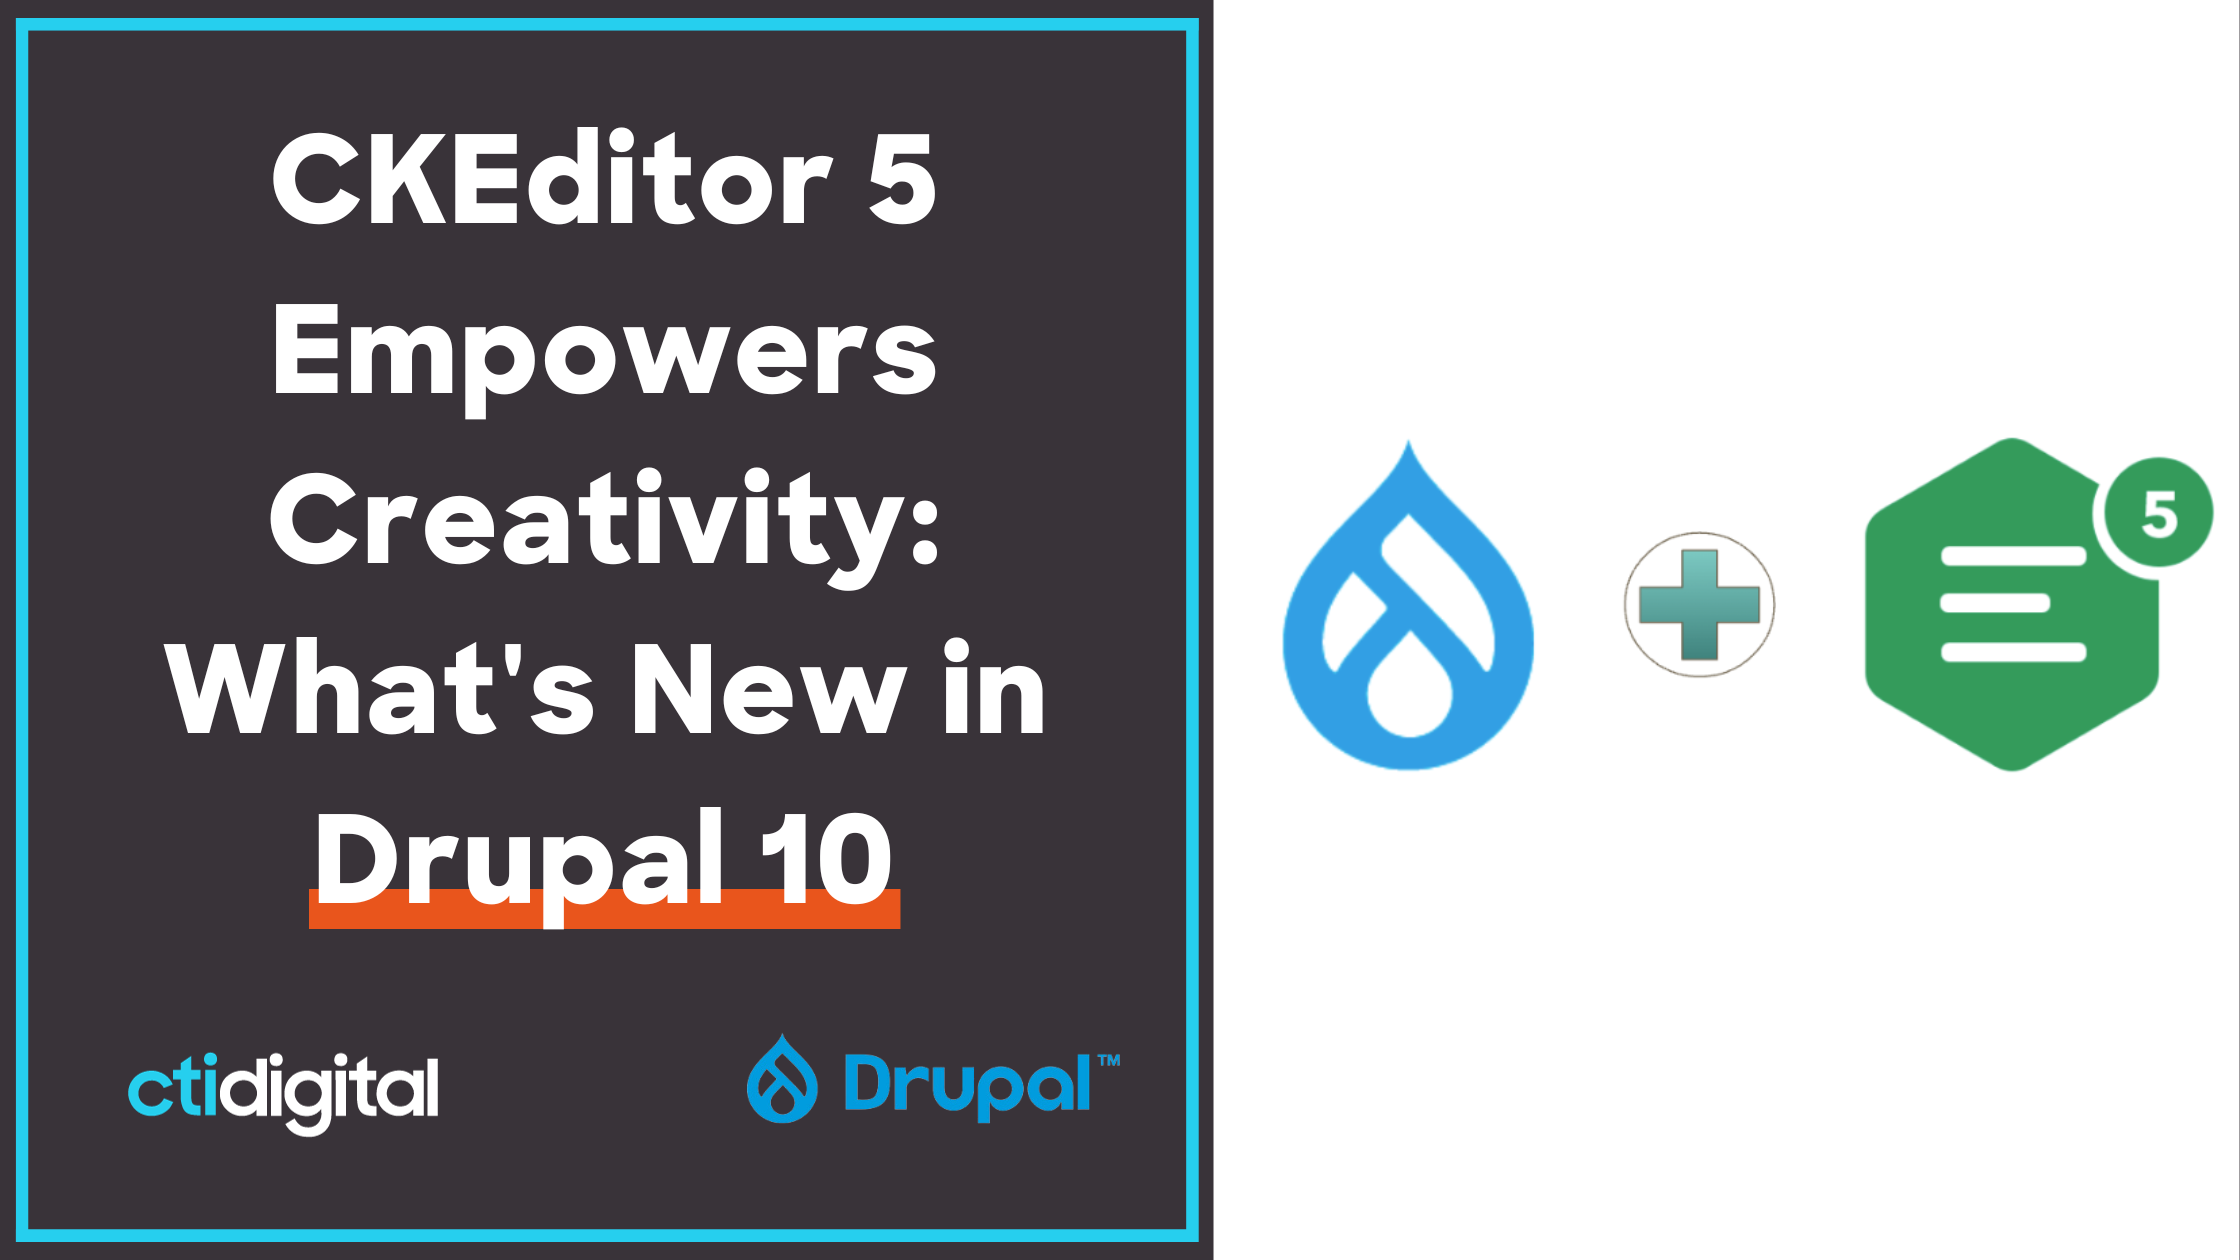 Whats New in Drupal 10